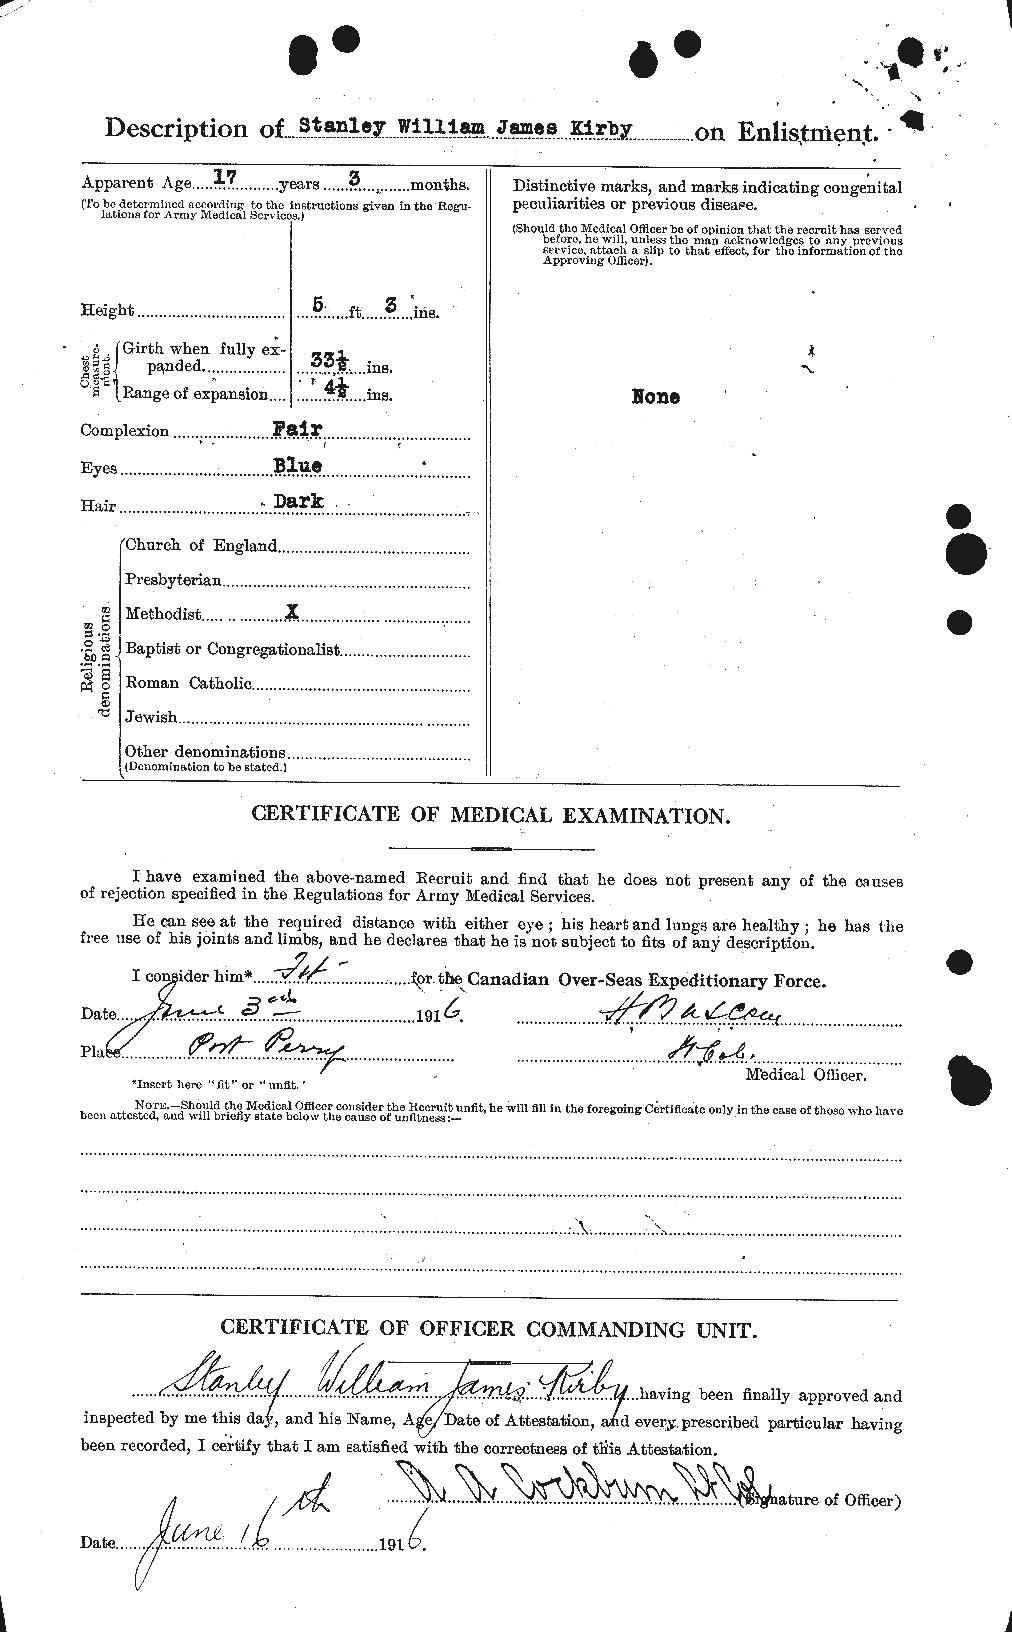 Personnel Records of the First World War - CEF 437276b